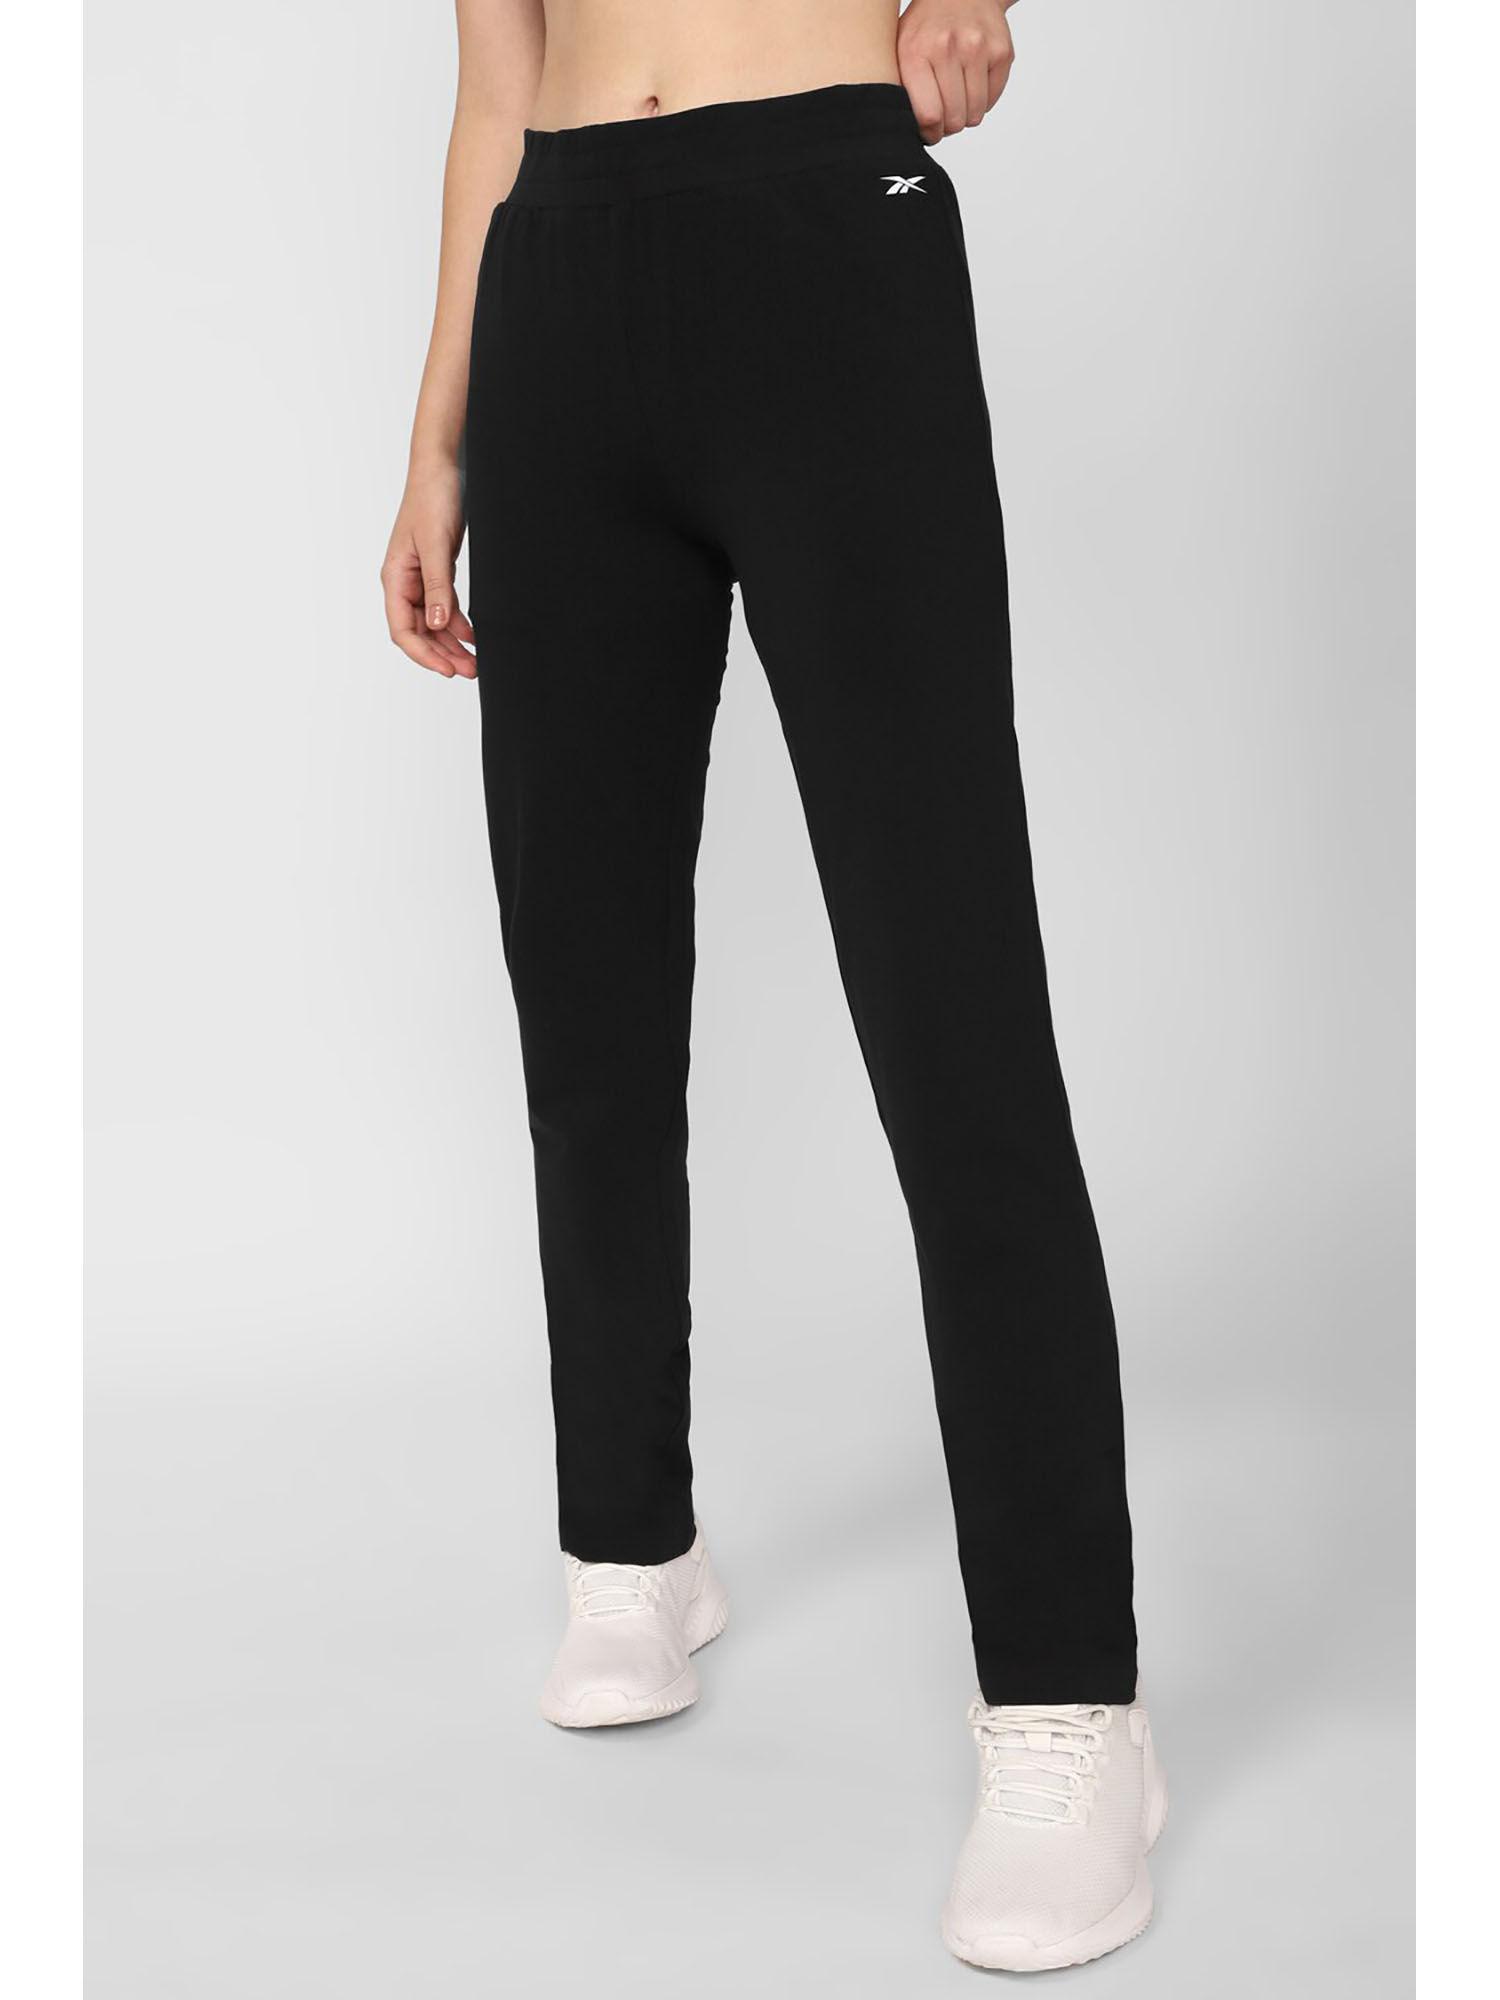 women-fnd-w-black-solid-track-pant